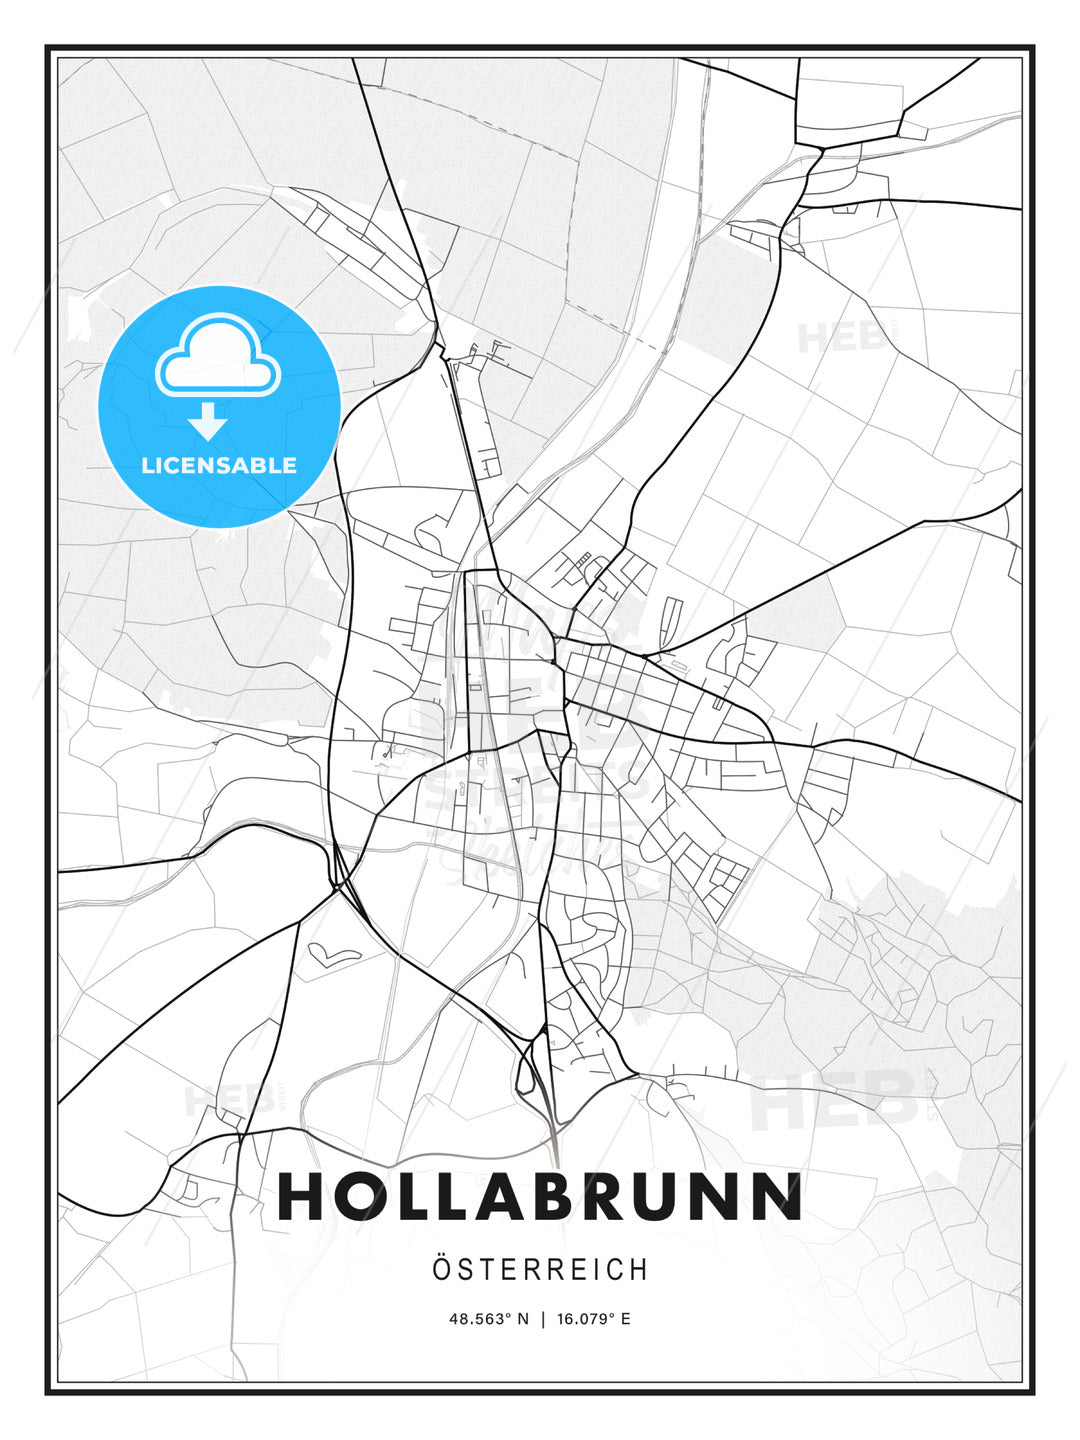 Hollabrunn, Austria, Modern Print Template in Various Formats - HEBSTREITS Sketches